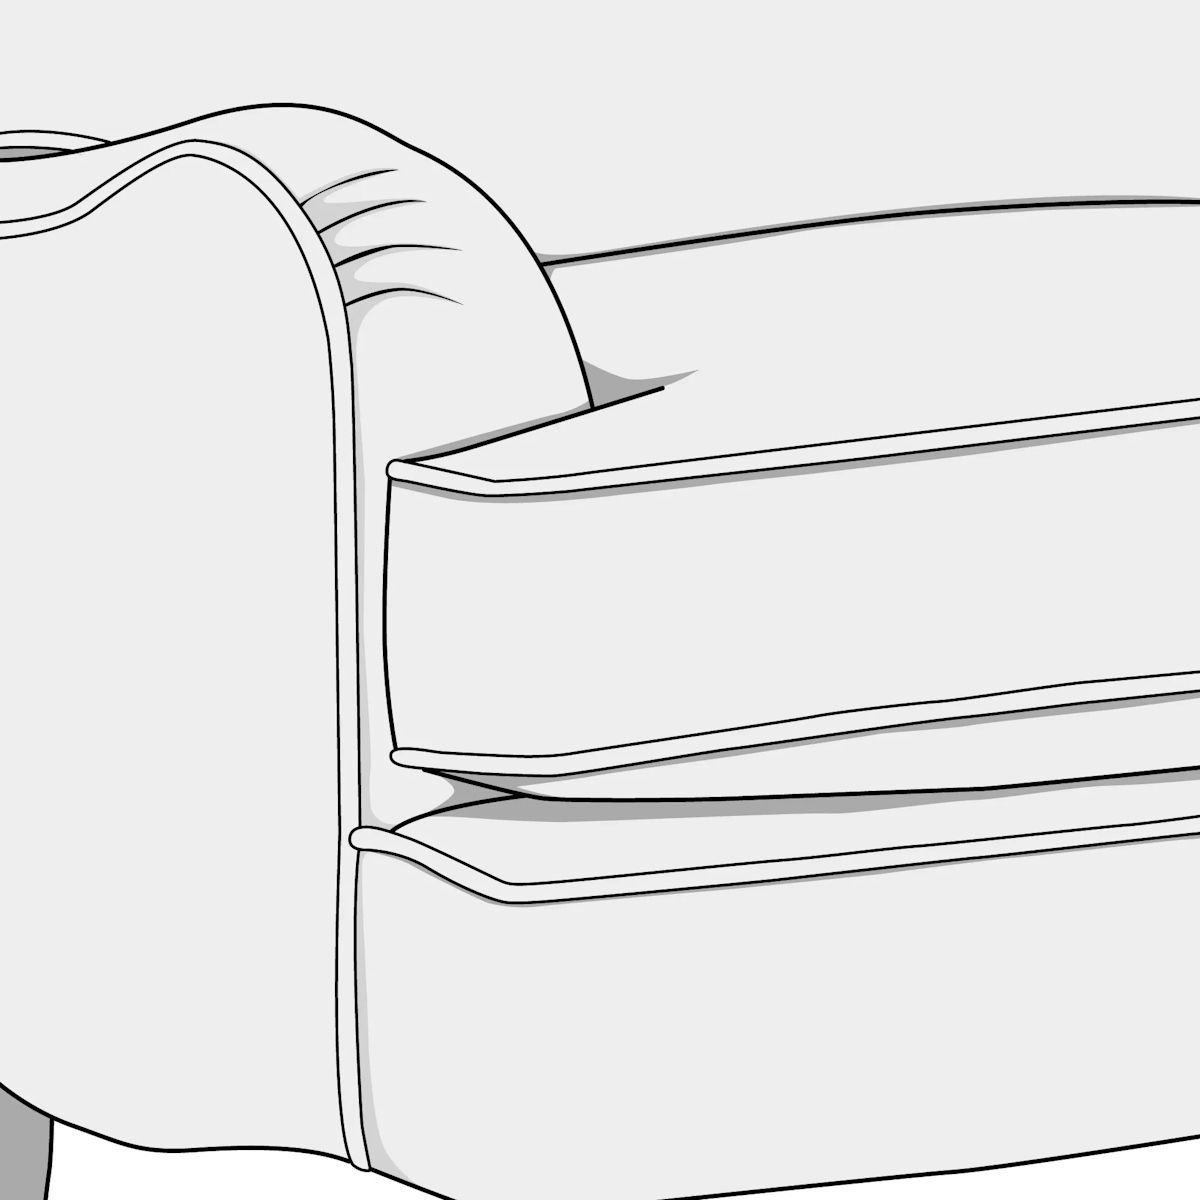 Illustration of L, J and T sofa cushion styles